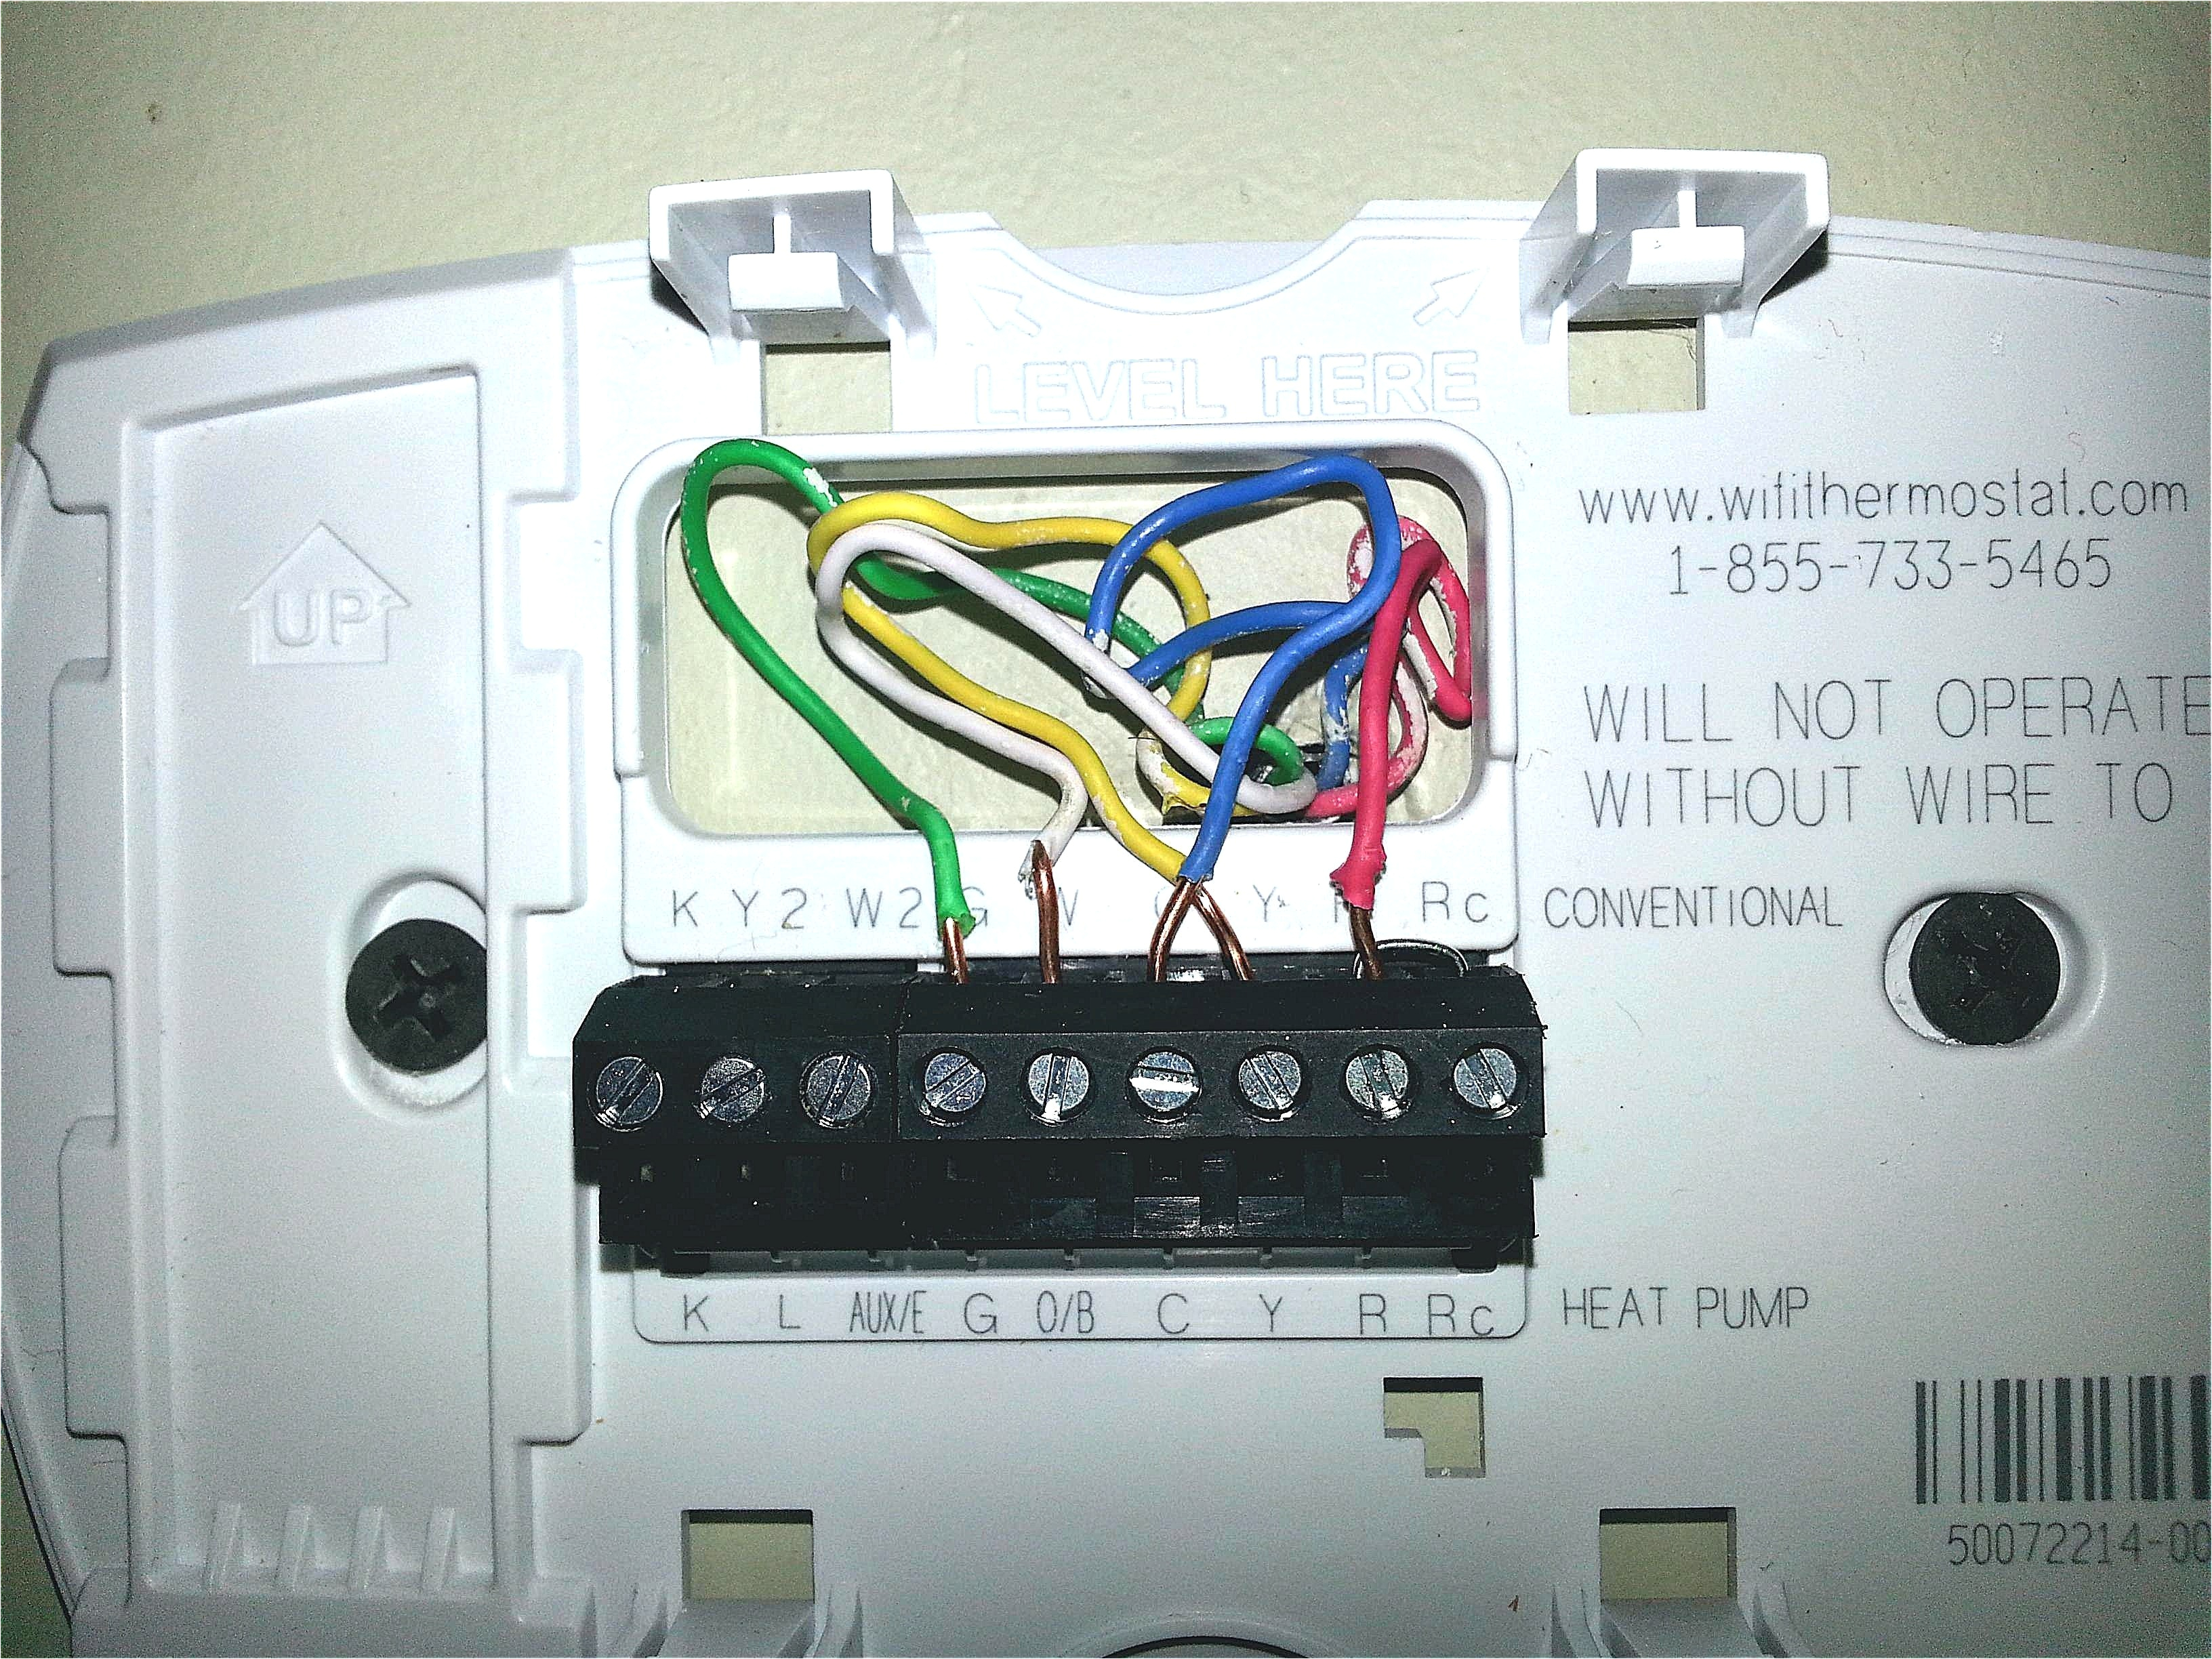 honeywell thermostat wiring diagram wires wiring database diagram honeywell wifi thermostat wiring diagram honeywell thermostat wiring